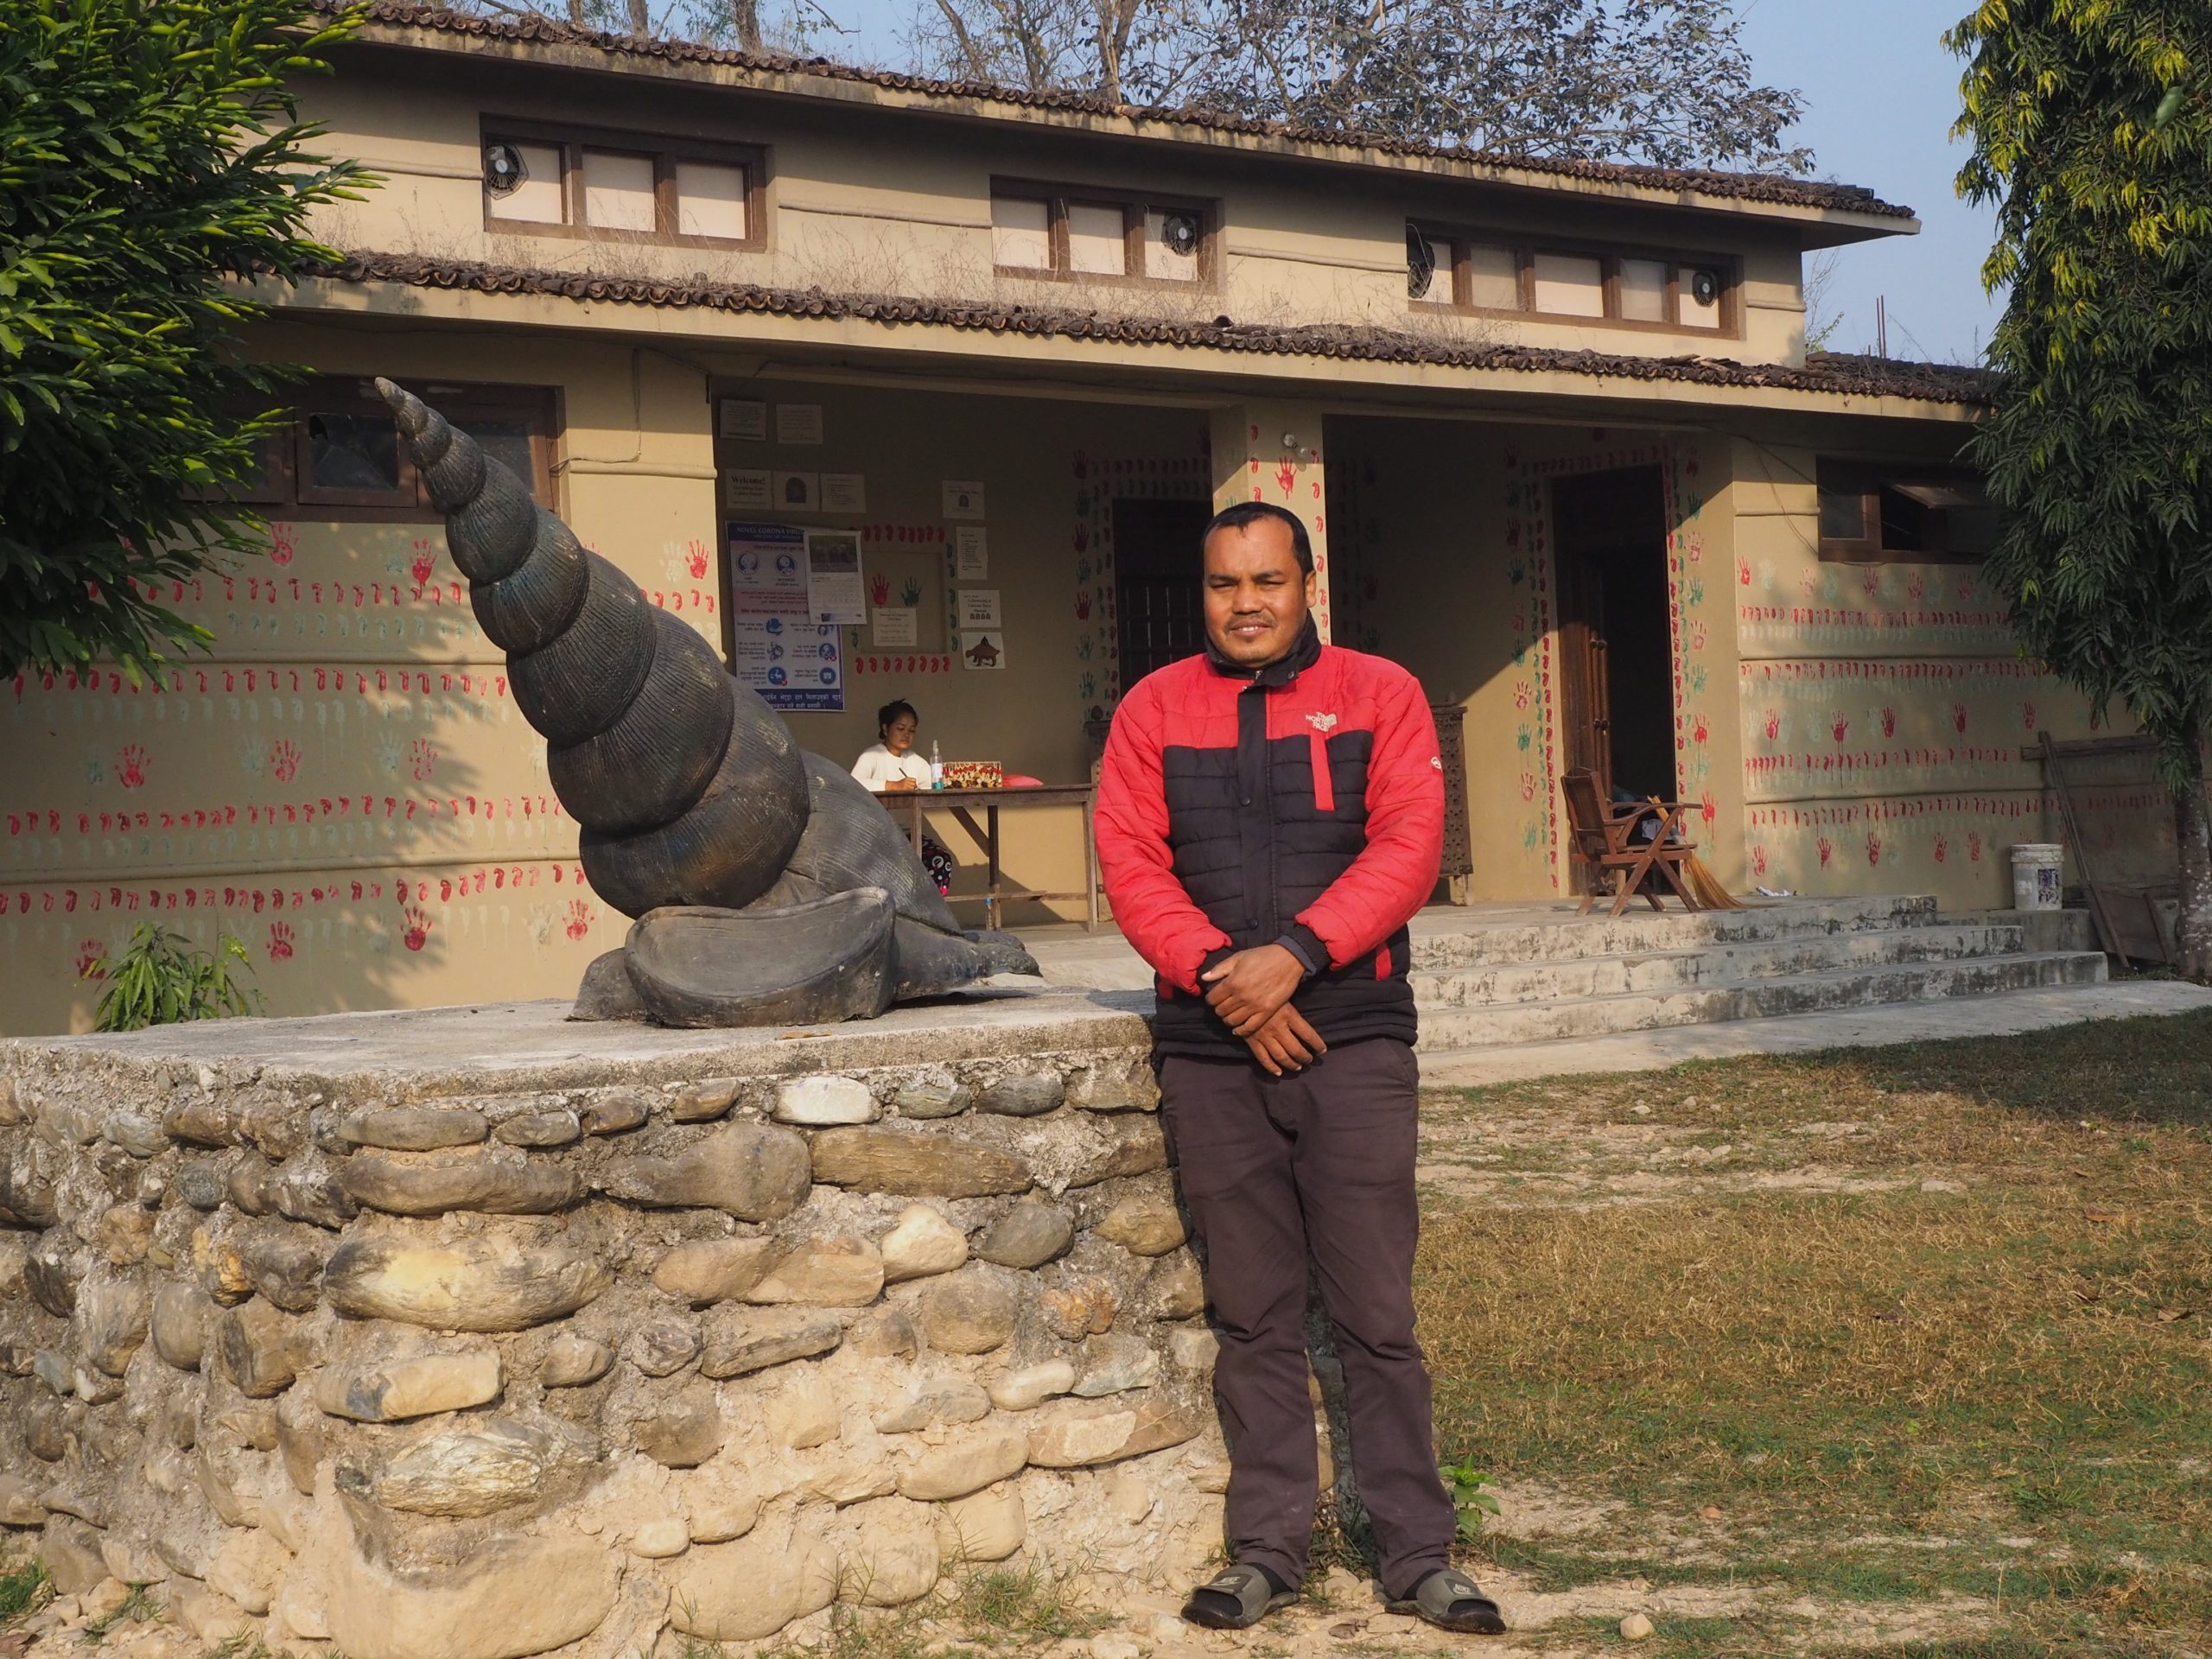 Birendra Mahato next to a statue of a ghongi (water snail, a traditional indigenous food) at the Tharu Cultural Museum and Research Center outside Sauraha (Image: Peter Gill)